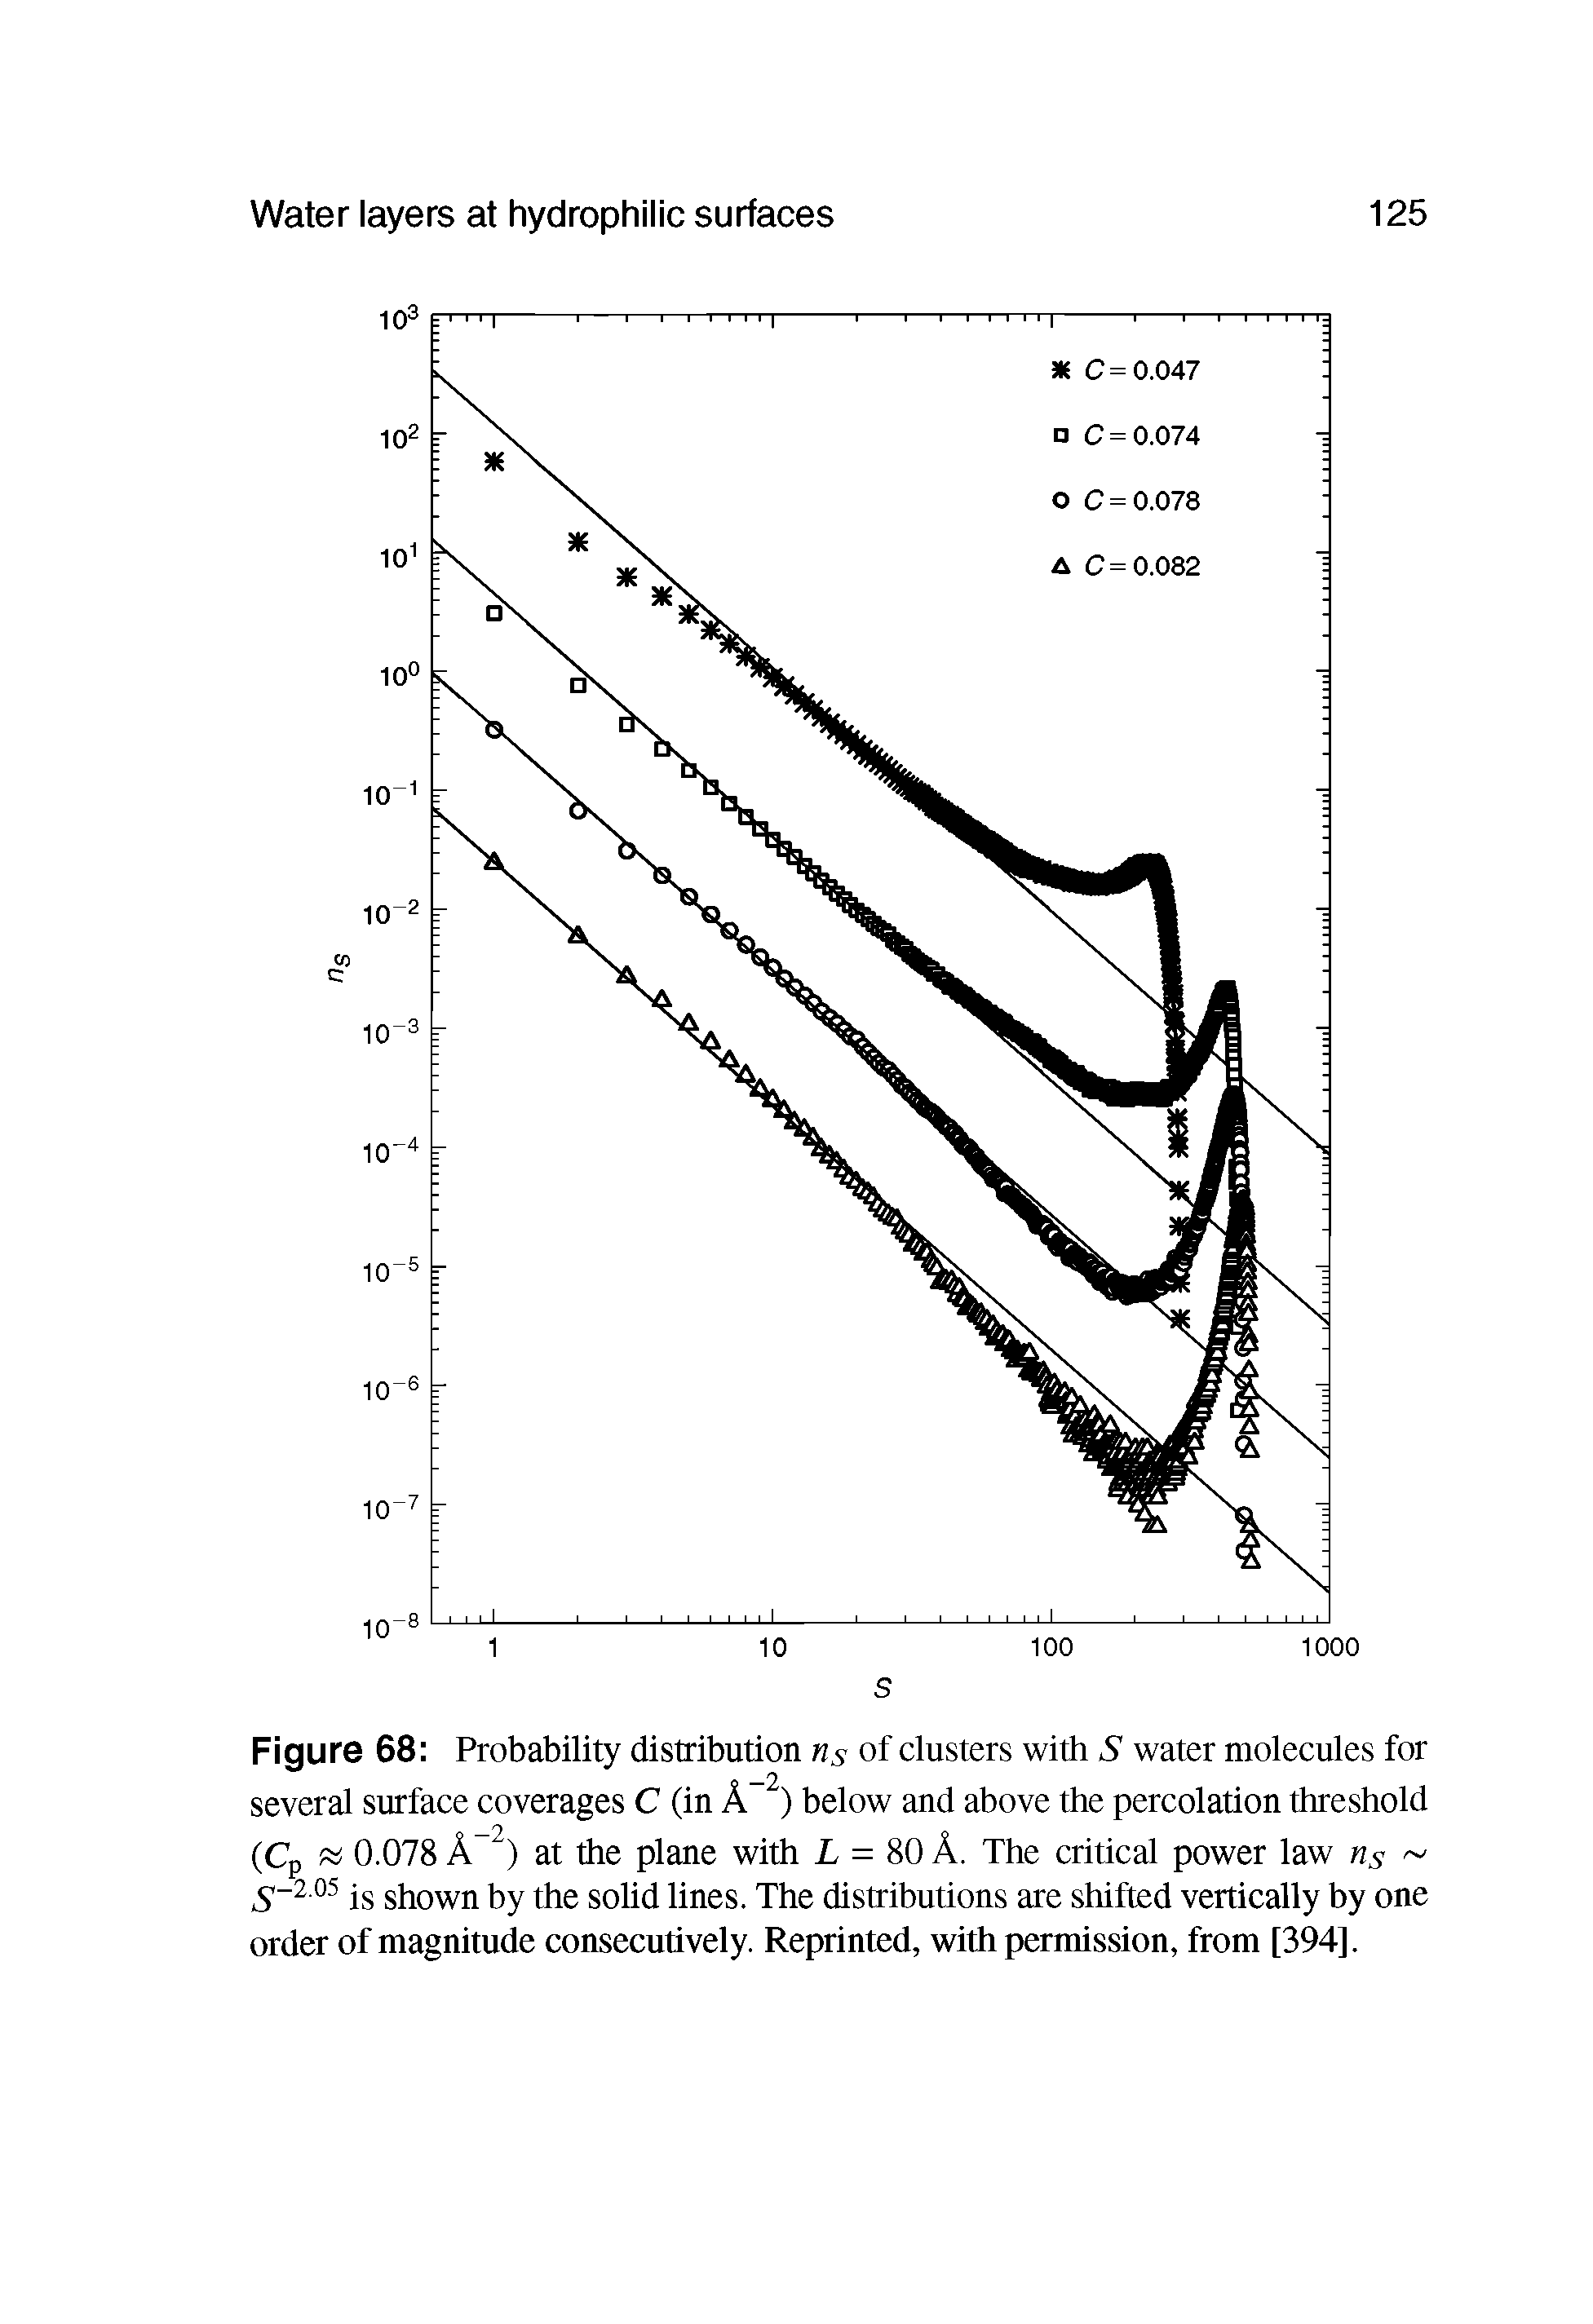 Figure 68 Probability distribution ns of clusters with S water molecules for several surface coverages C (in A below and above the percolation threshold (Cp 0.078 A ) at the plane with L — 80 A. The critical power law ns -2.05 shown by the solid lines. The distributions are shifted vertically by one order of magnitude consecutively. Reprinted, with permission, from [394],...